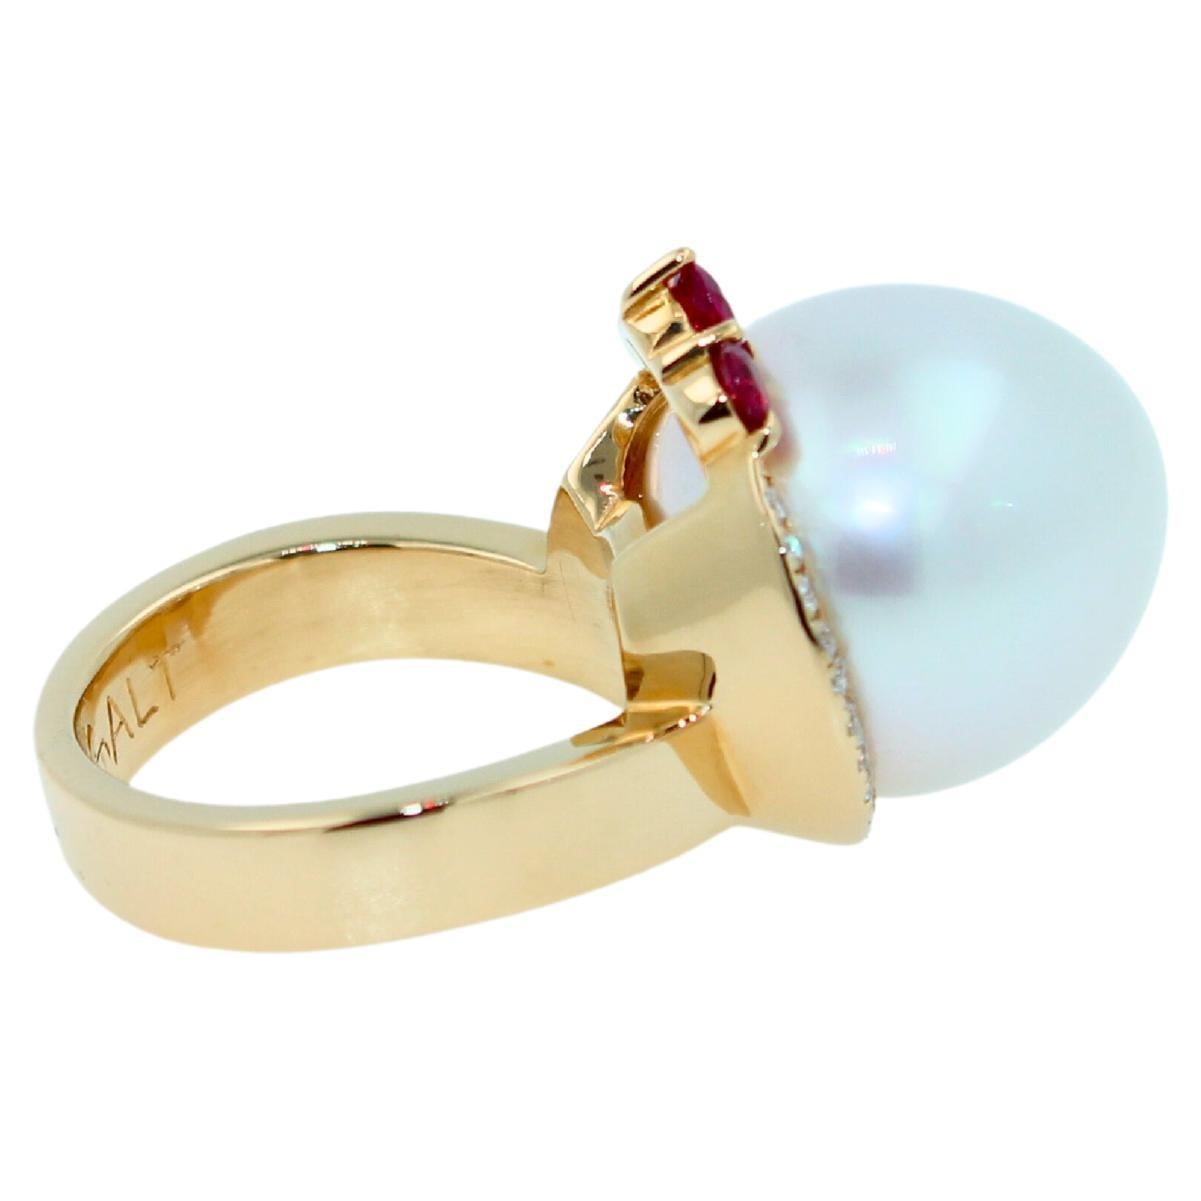 Women's or Men's White South Sea Pearl Diamond Halo Comet Form Pink Red Spinel 18 Karat Gold Ring For Sale